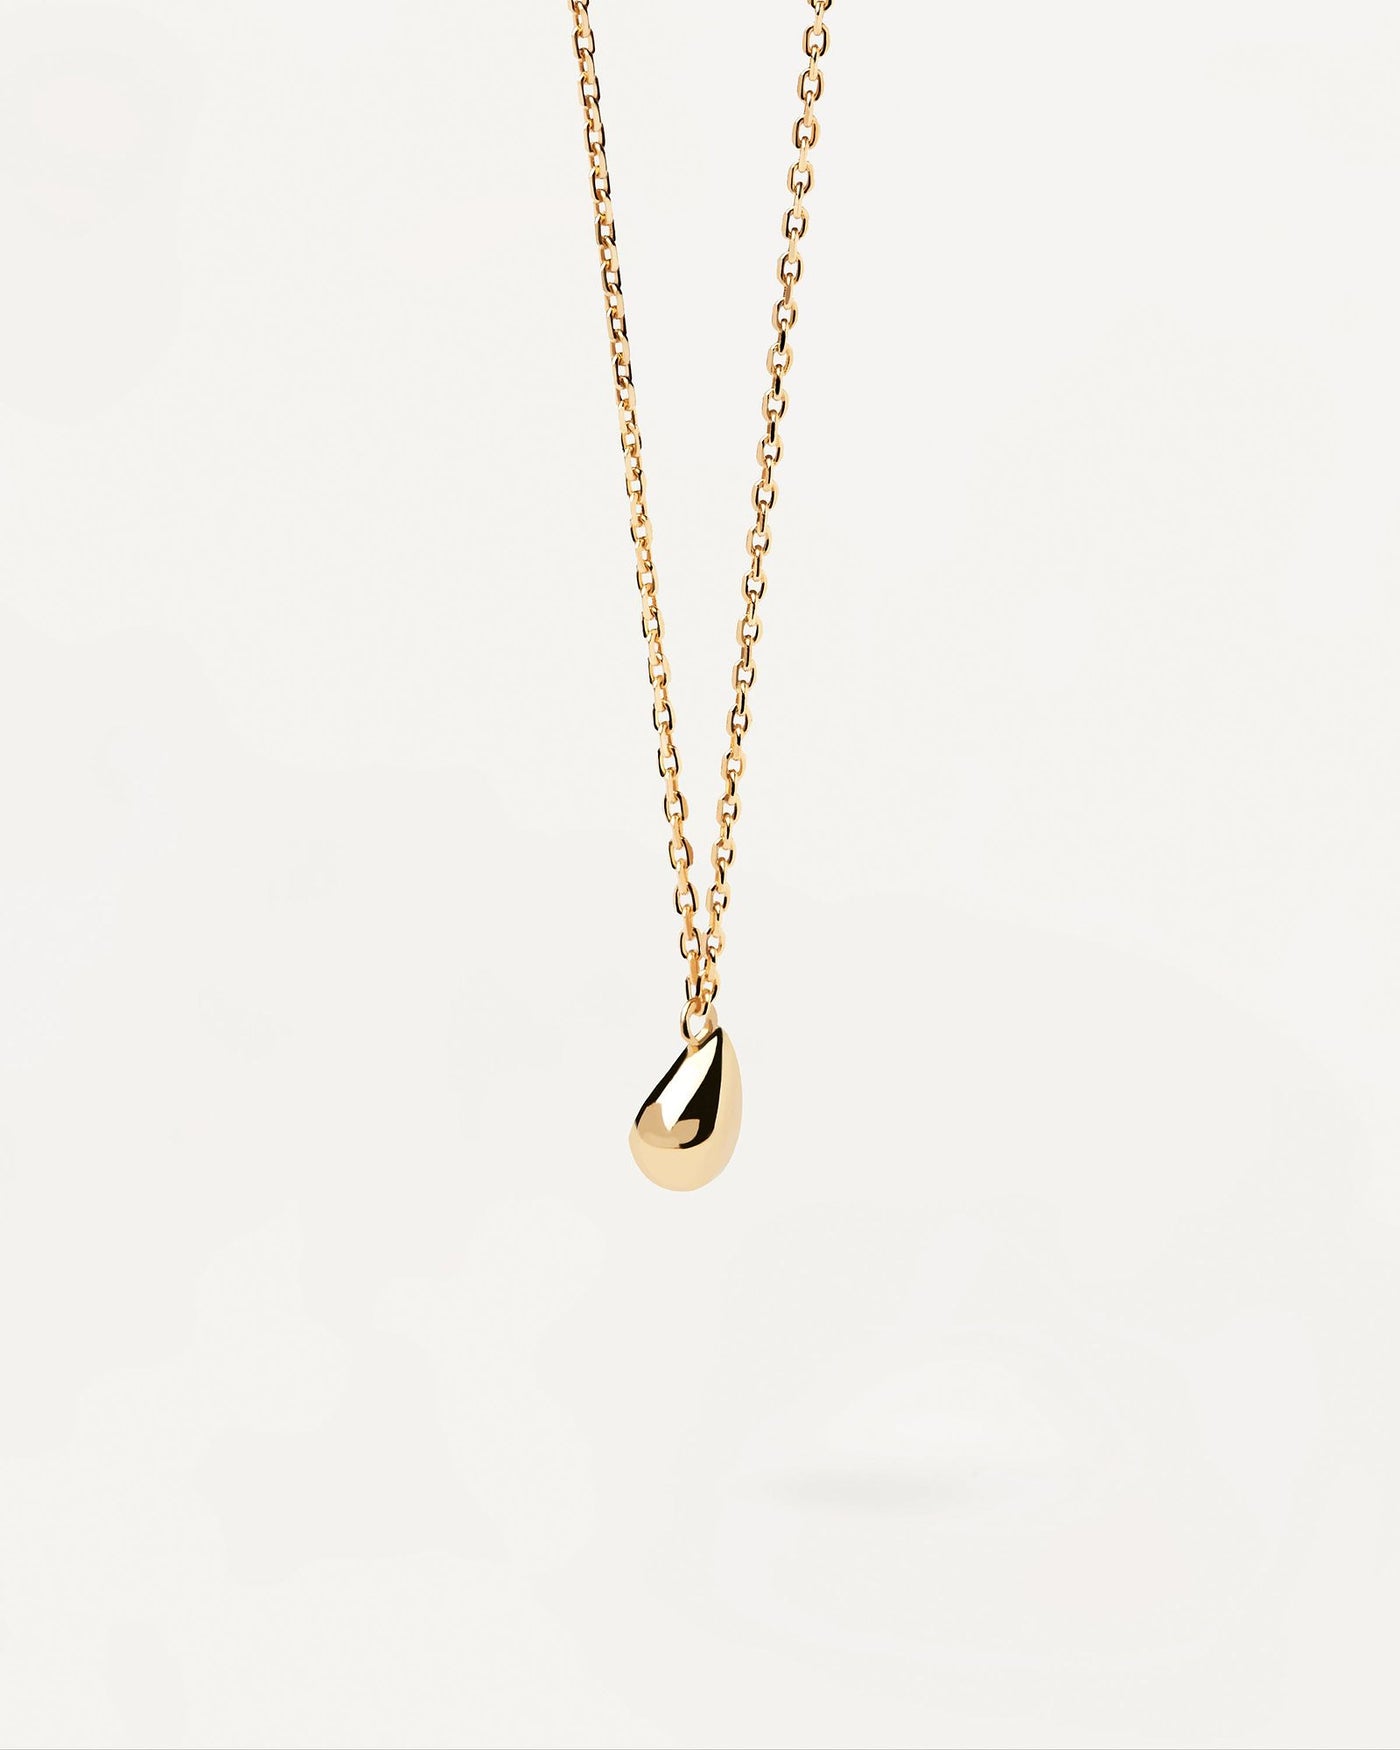 2024 Selection | Drop Necklace. Gold-plated silver necklace with drop shape pendant. Get the latest arrival from PDPAOLA. Place your order safely and get this Best Seller. Free Shipping.